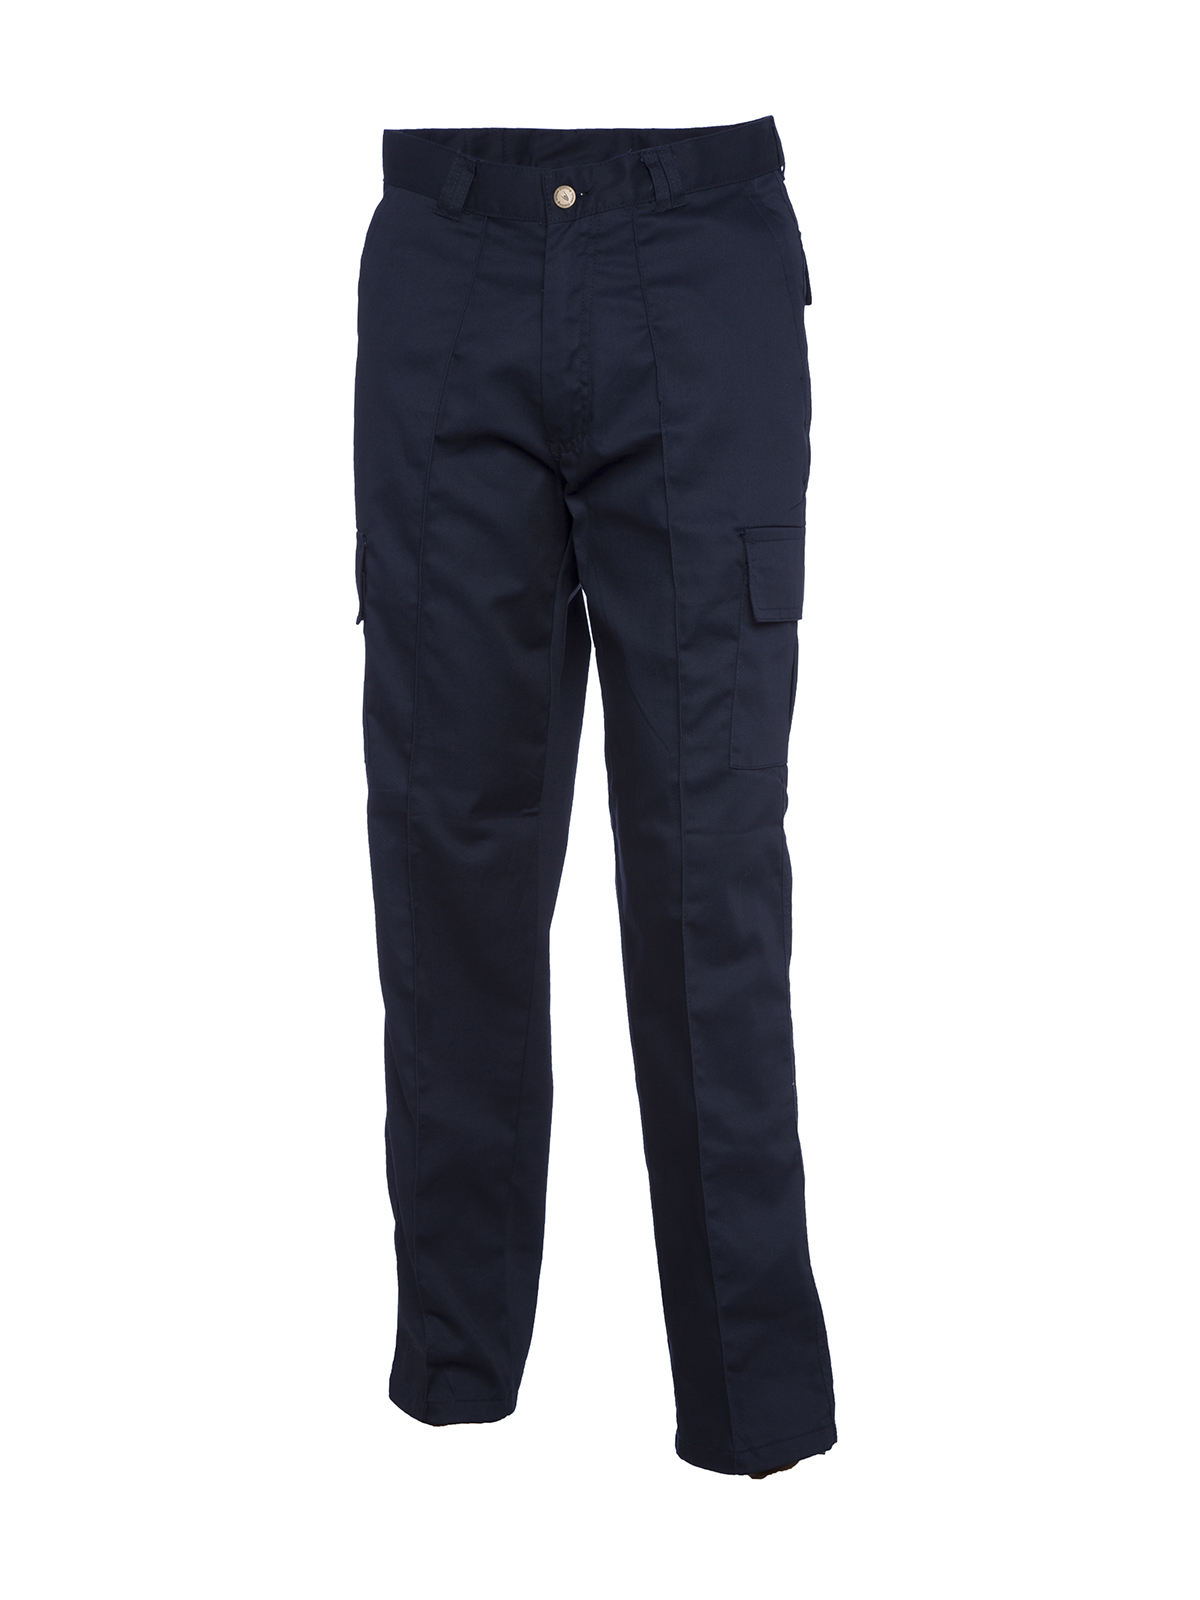 Cargo Trousers, Navy Blue - 44L